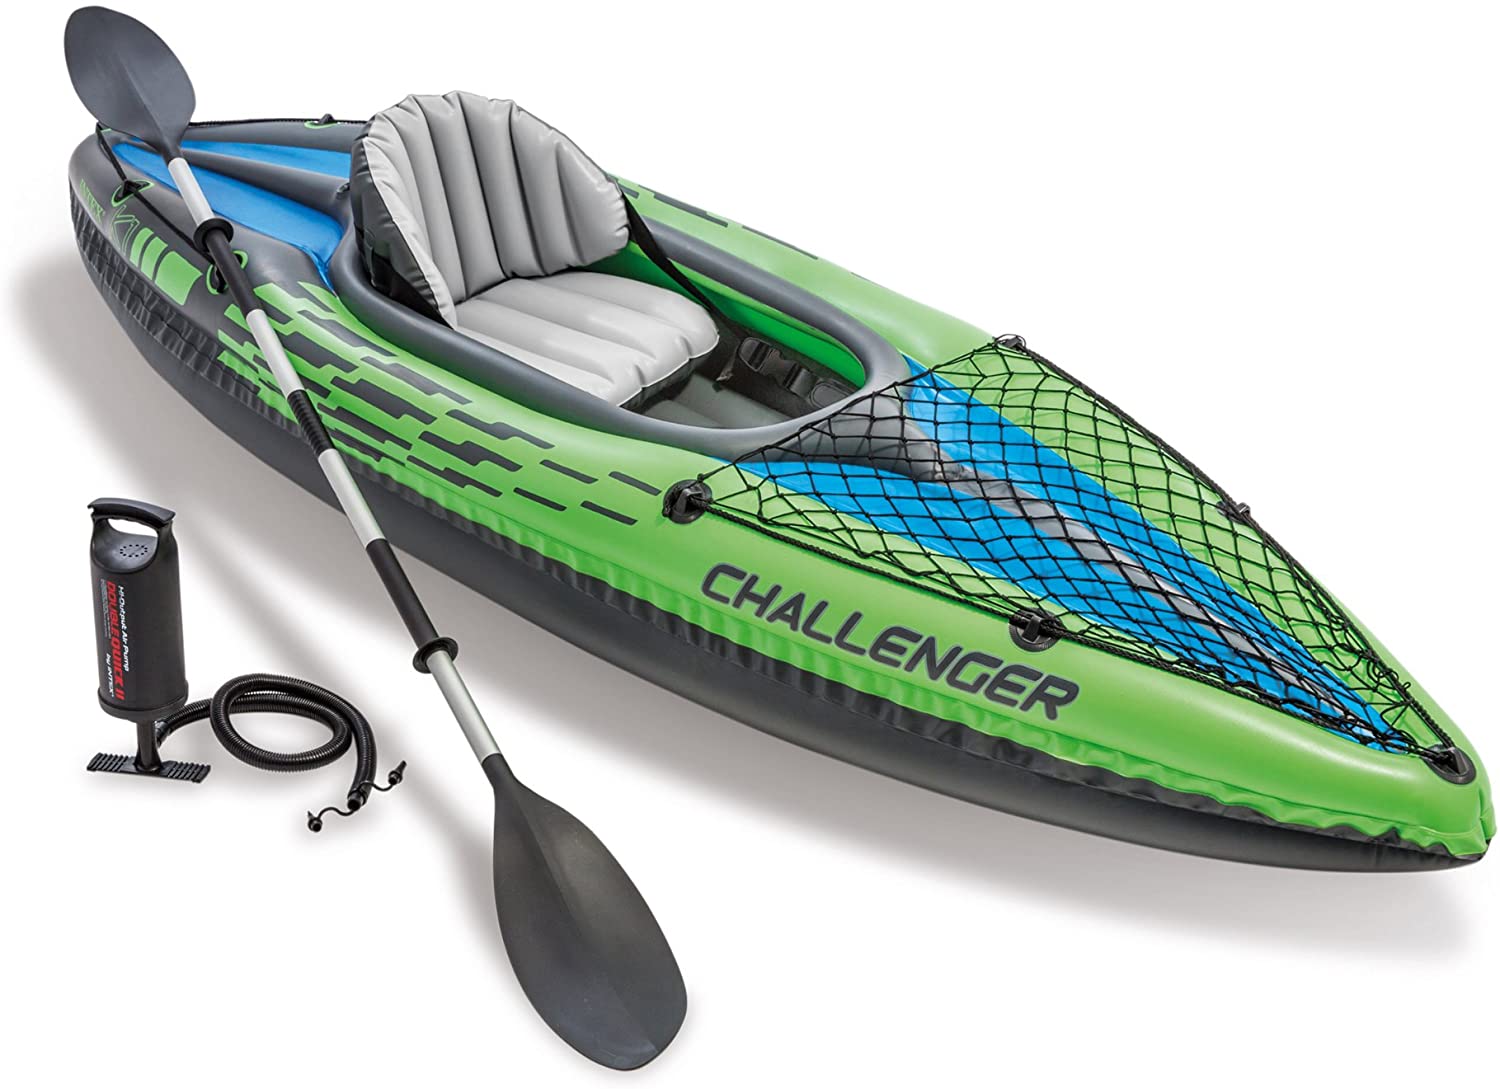 Intex Challenger Inflatable Kayak, Father's Day Gift Guide 2022, 